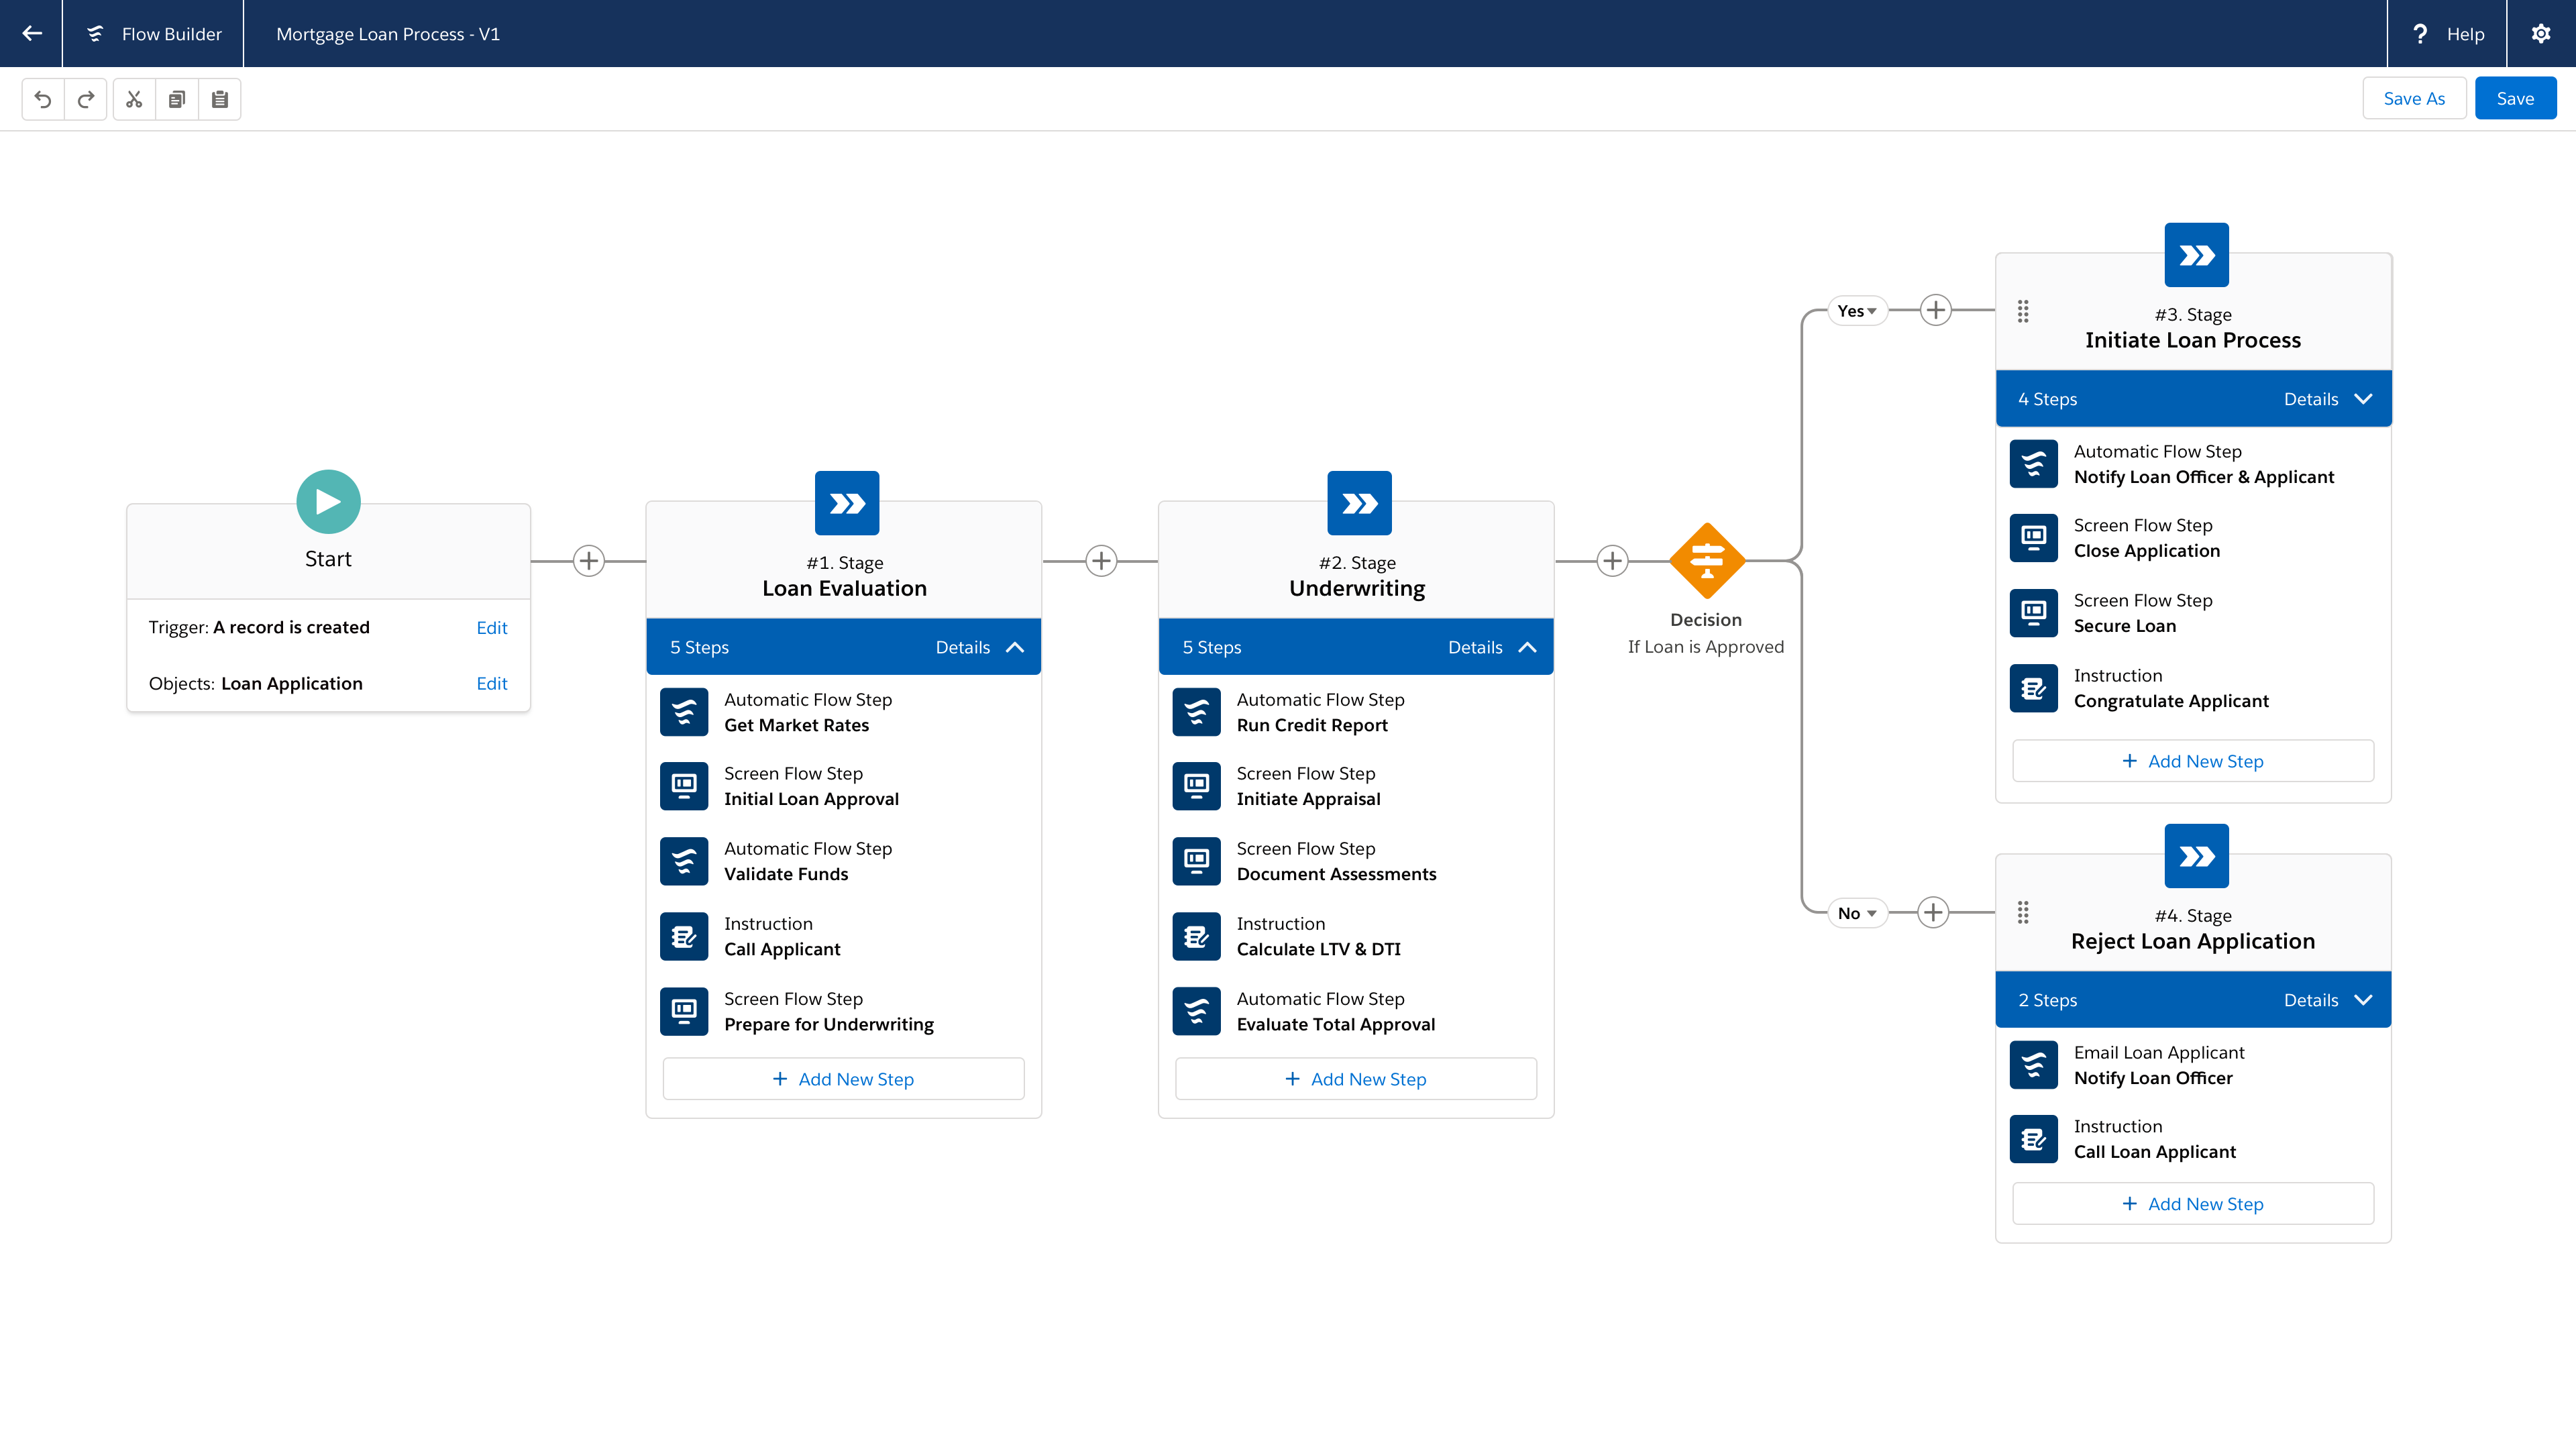 Flow Orchestrator maps out all the steps in a mortgage loan processing workflow